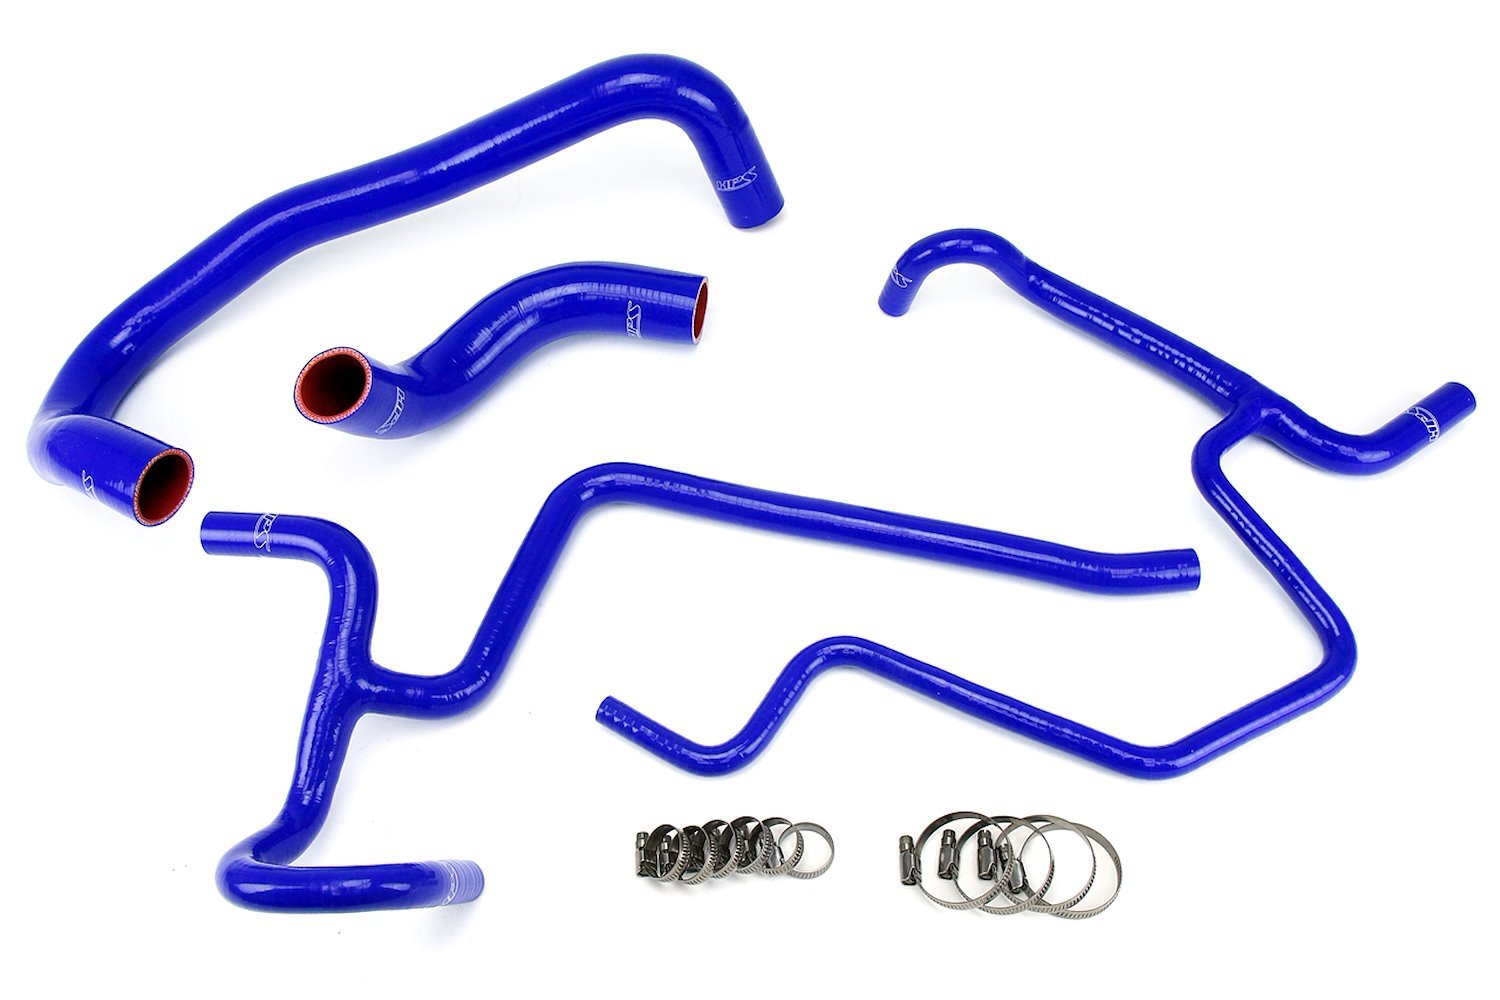 57-1327-BLUE Coolant Hose Kit, High-Temp 3-Ply Reinforced Silicone, Replace Rubber Radiator Heater Coolant Hoses